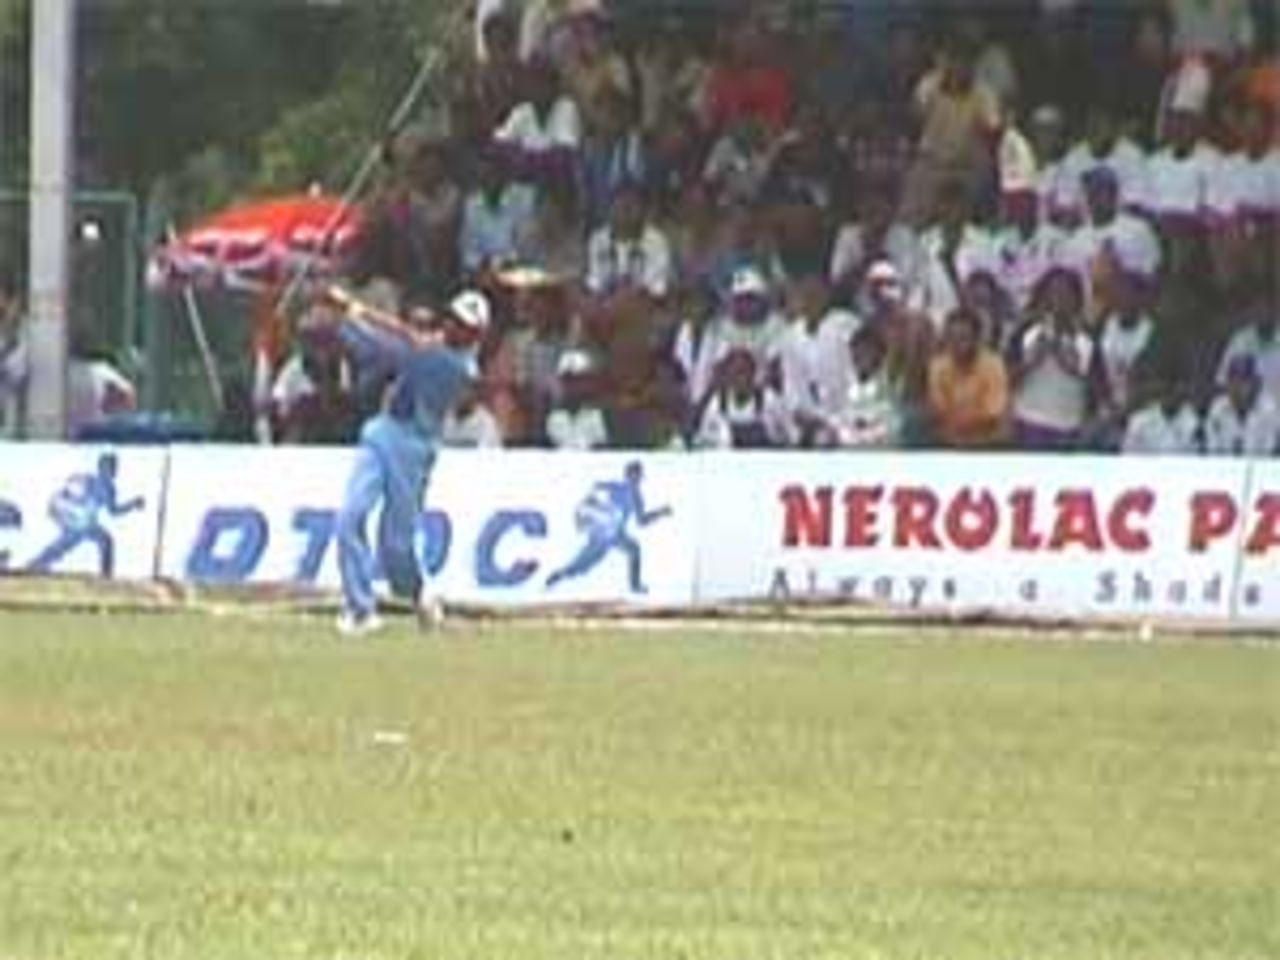 Shukla fires the ball in from the outfield, India v West Indies (3rd ODI), Coca-Cola Singapore Challenge, 1999-2000, Kallang Ground, Singapore, 5 Sep 1999.